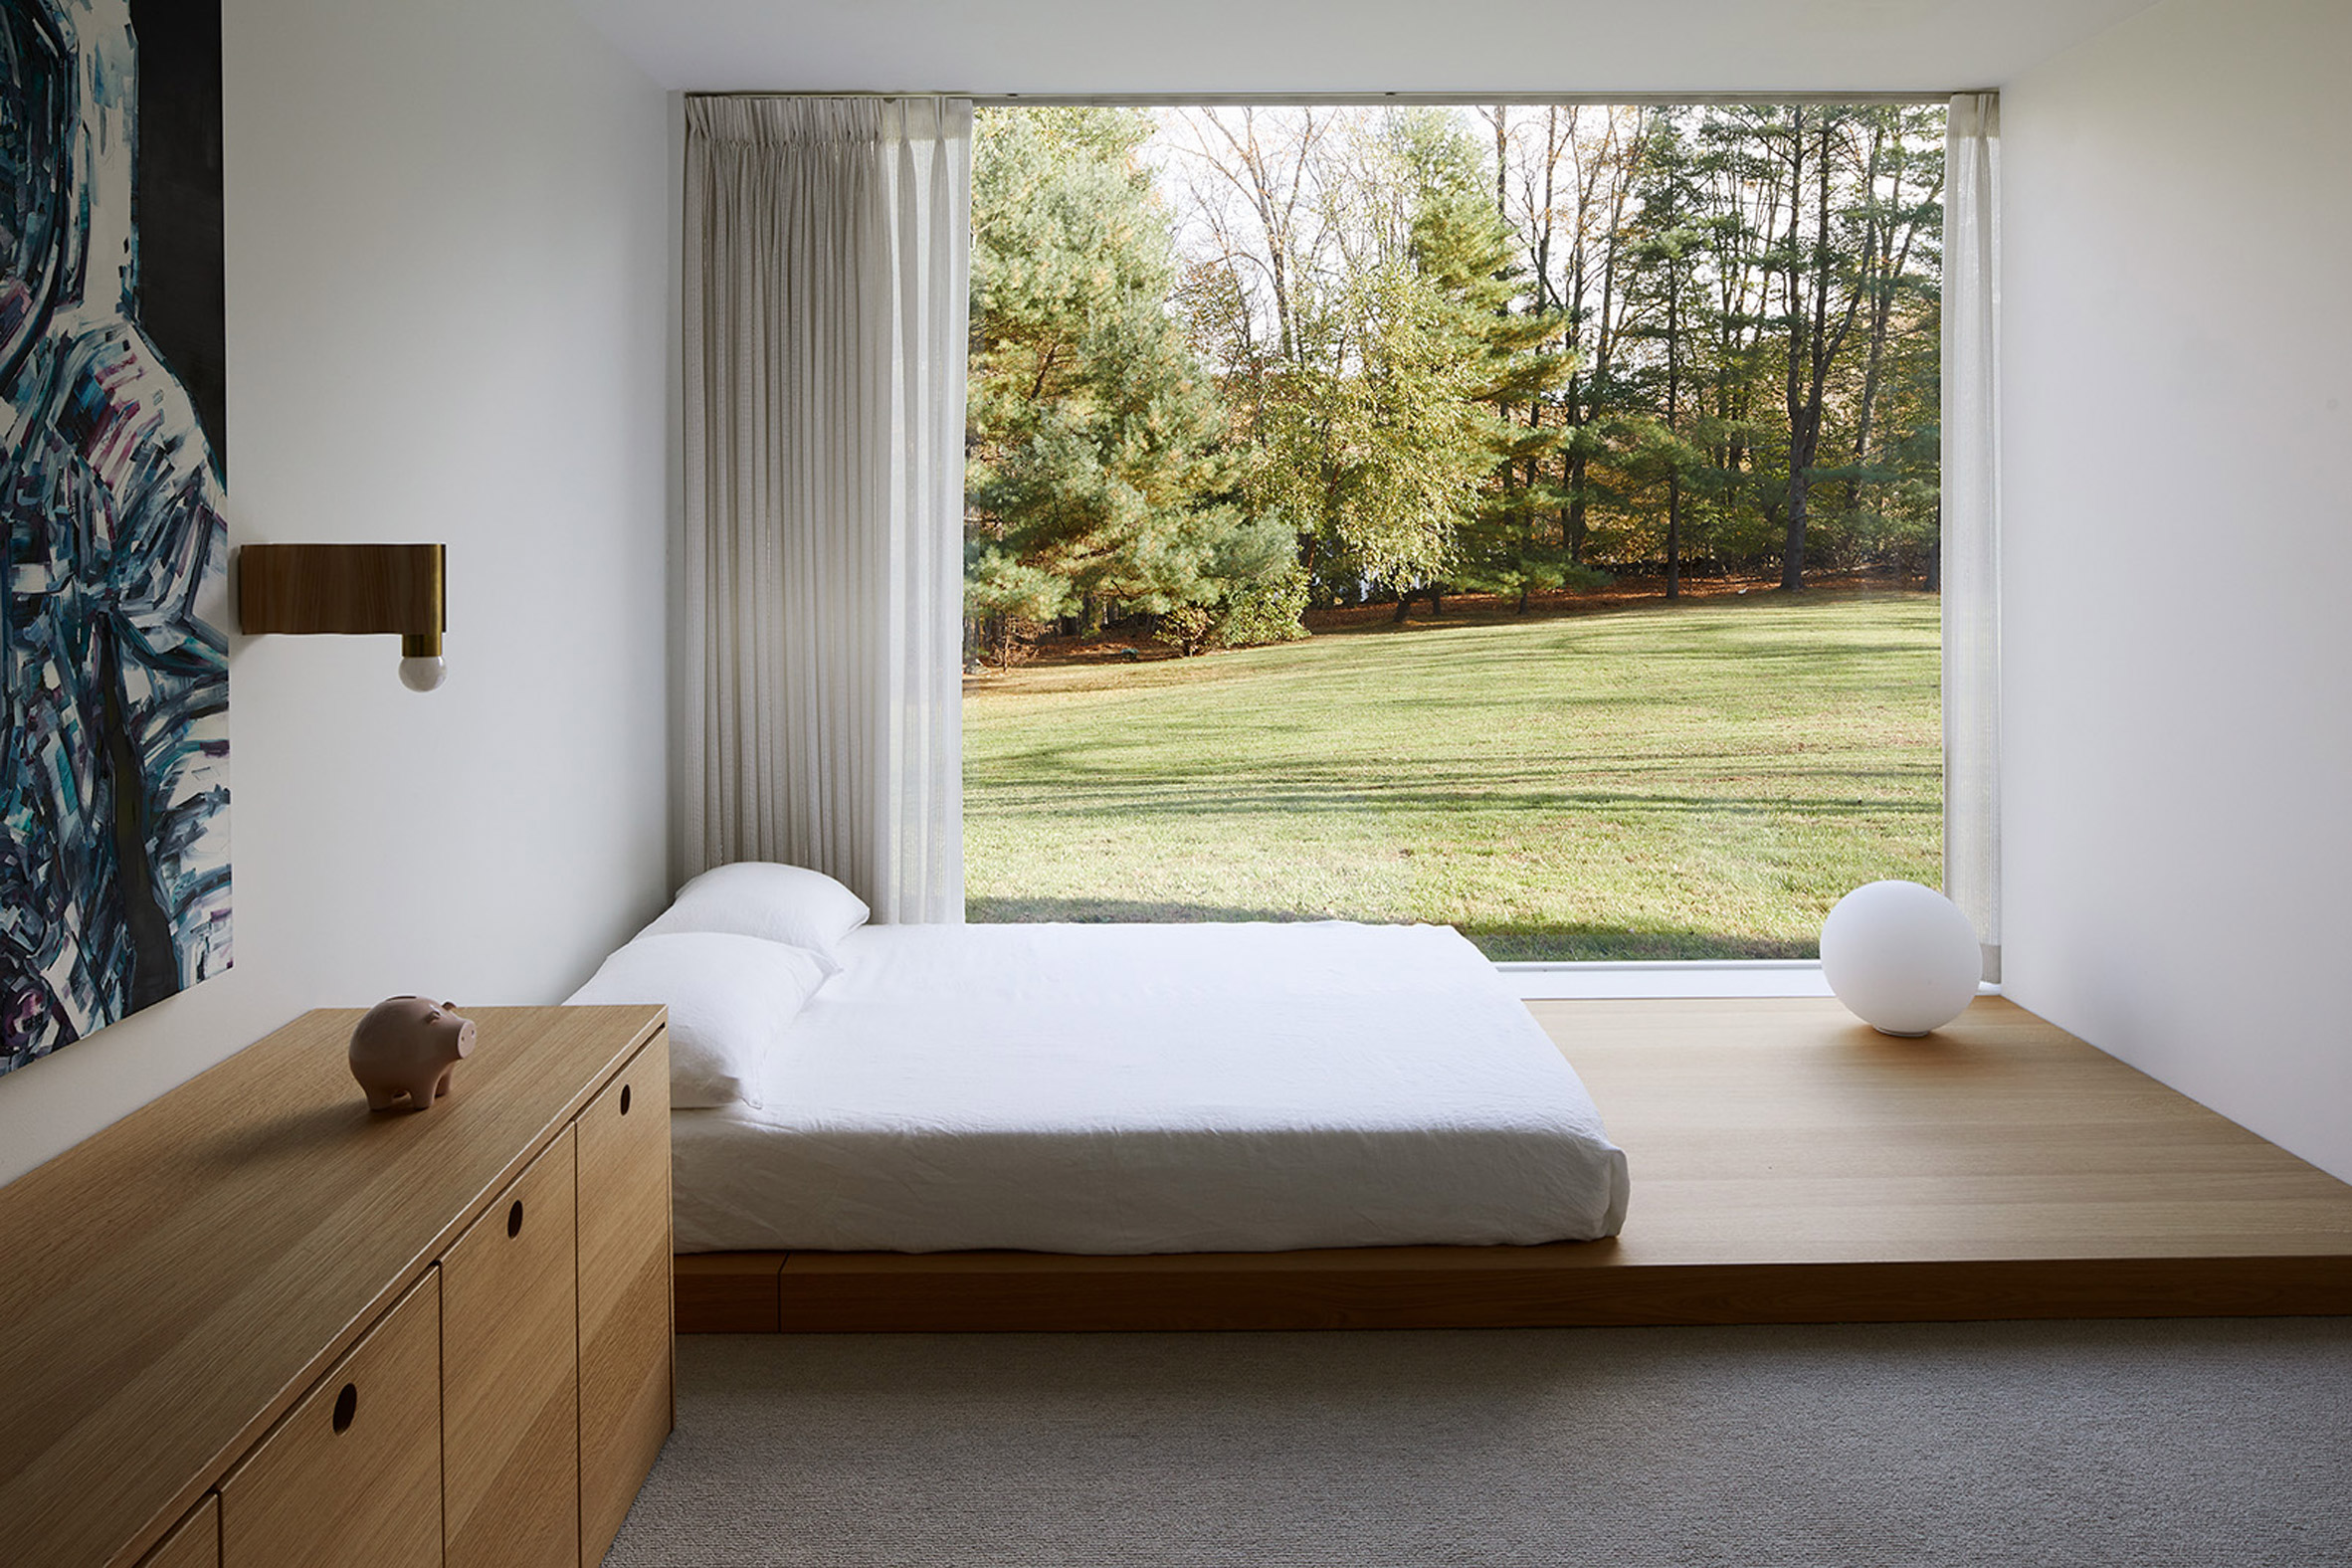 Bedroom by Magdalena Keck at Hudson Valley Glass House